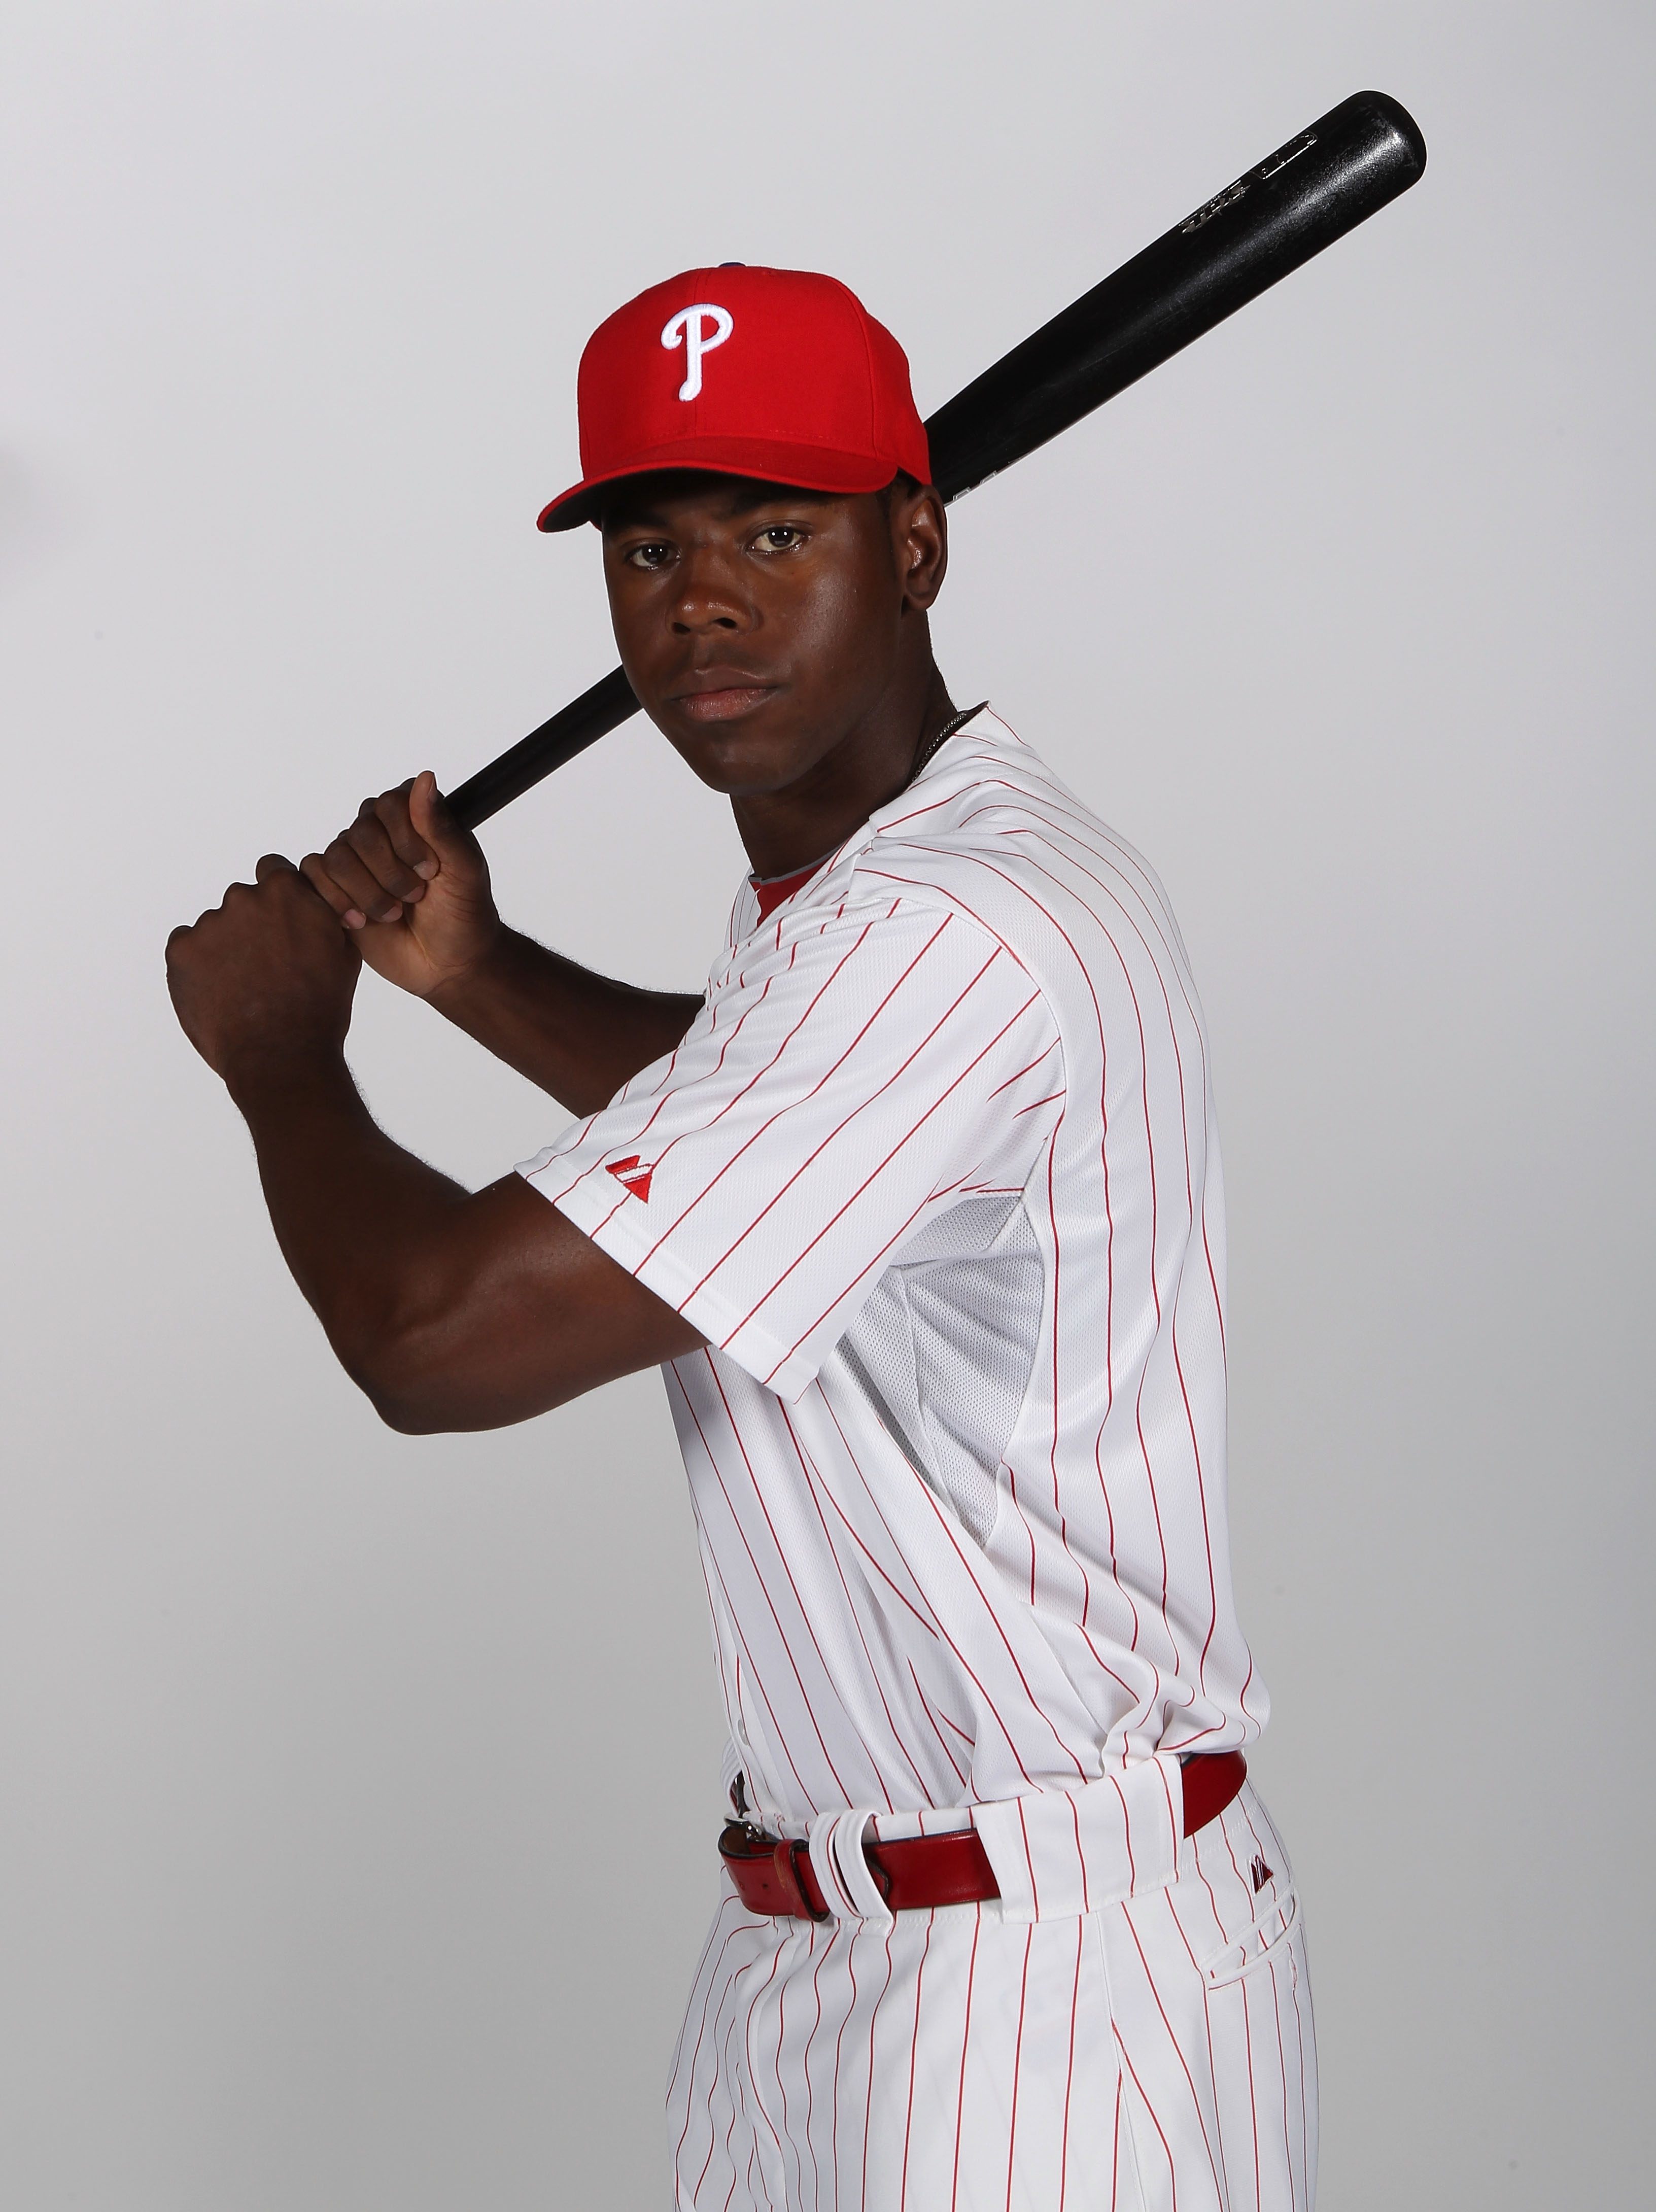 CLEARWATER, FL - FEBRUARY 22:  John Mayberry, Jr. #15 of the Philadelphia Phillies poses for a photo during Spring Training Media Photo Day at Bright House Networks Field on February 22, 2011 in Clearwater, Florida.  (Photo by Nick Laham/Getty Images)